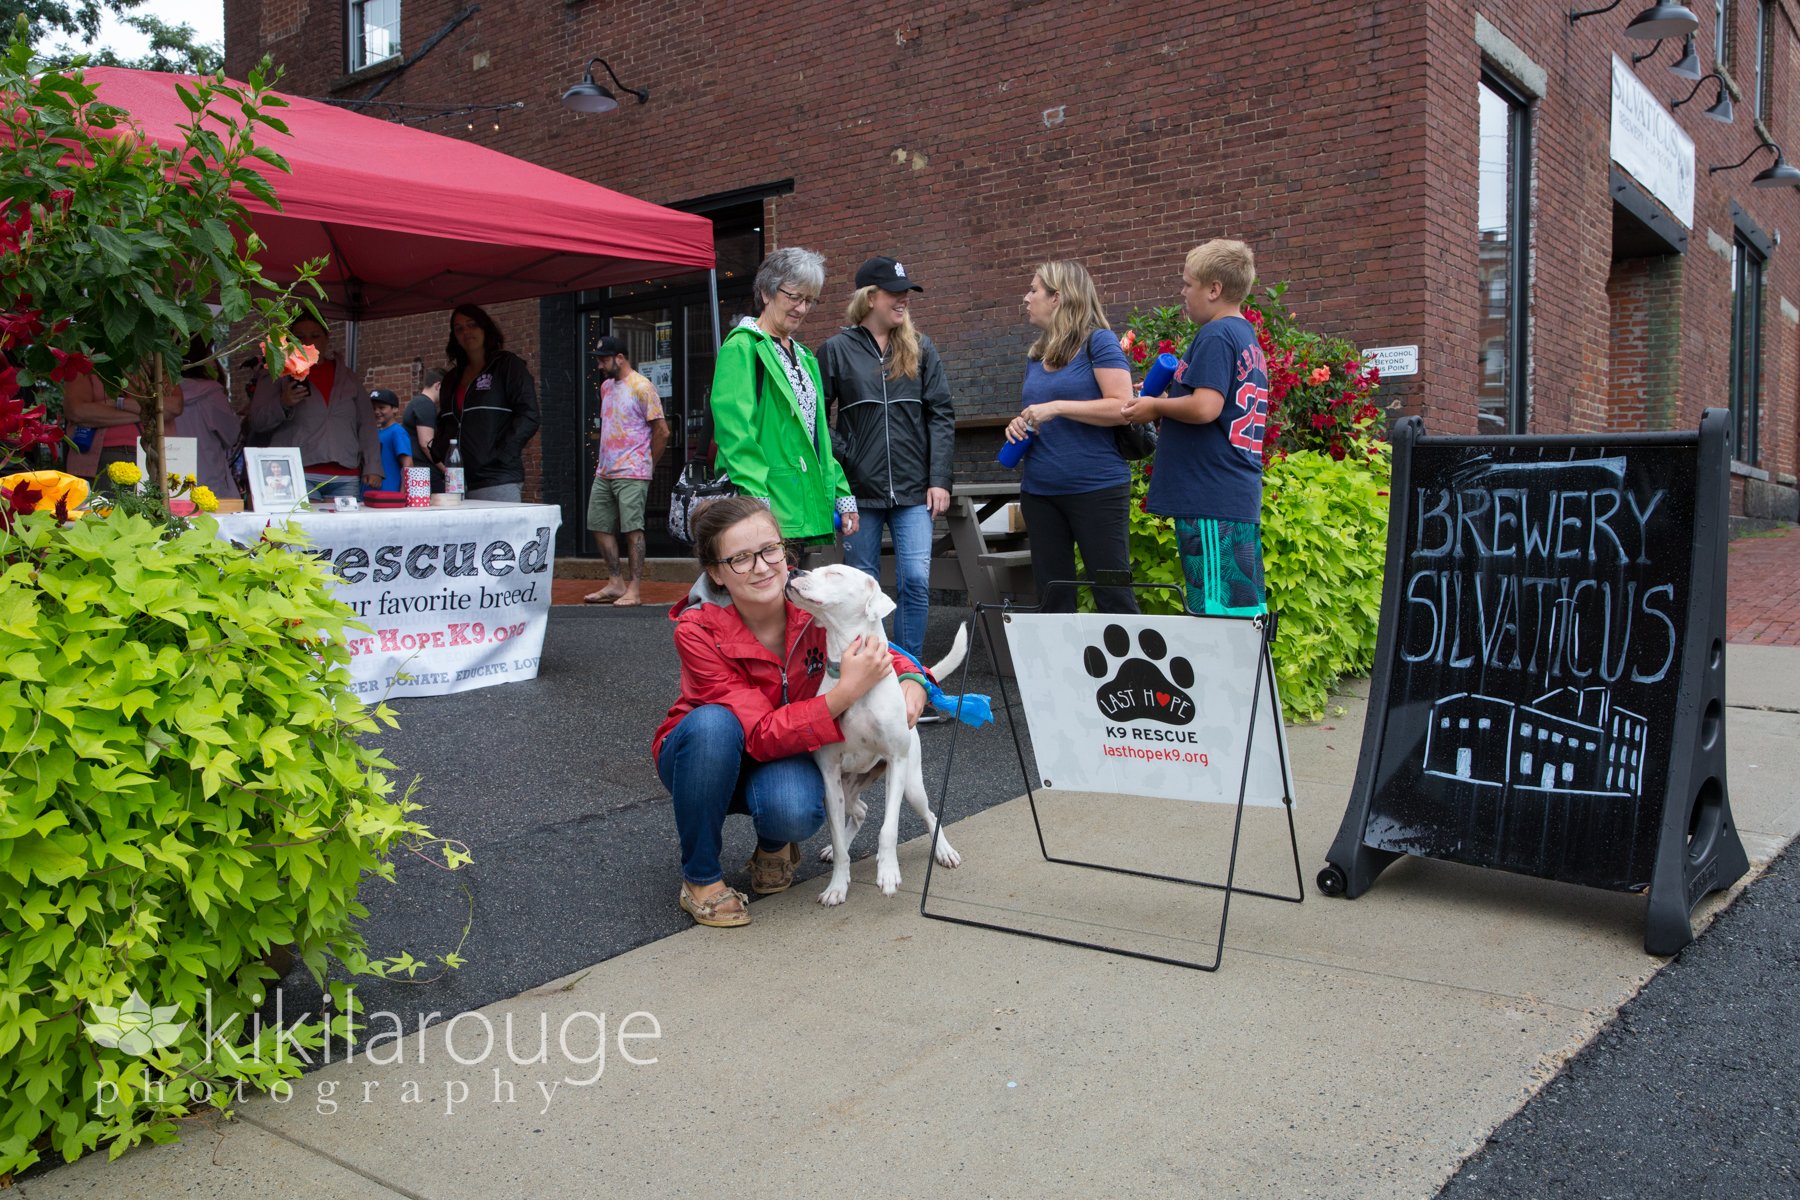 People in beer garden at dog rescue event